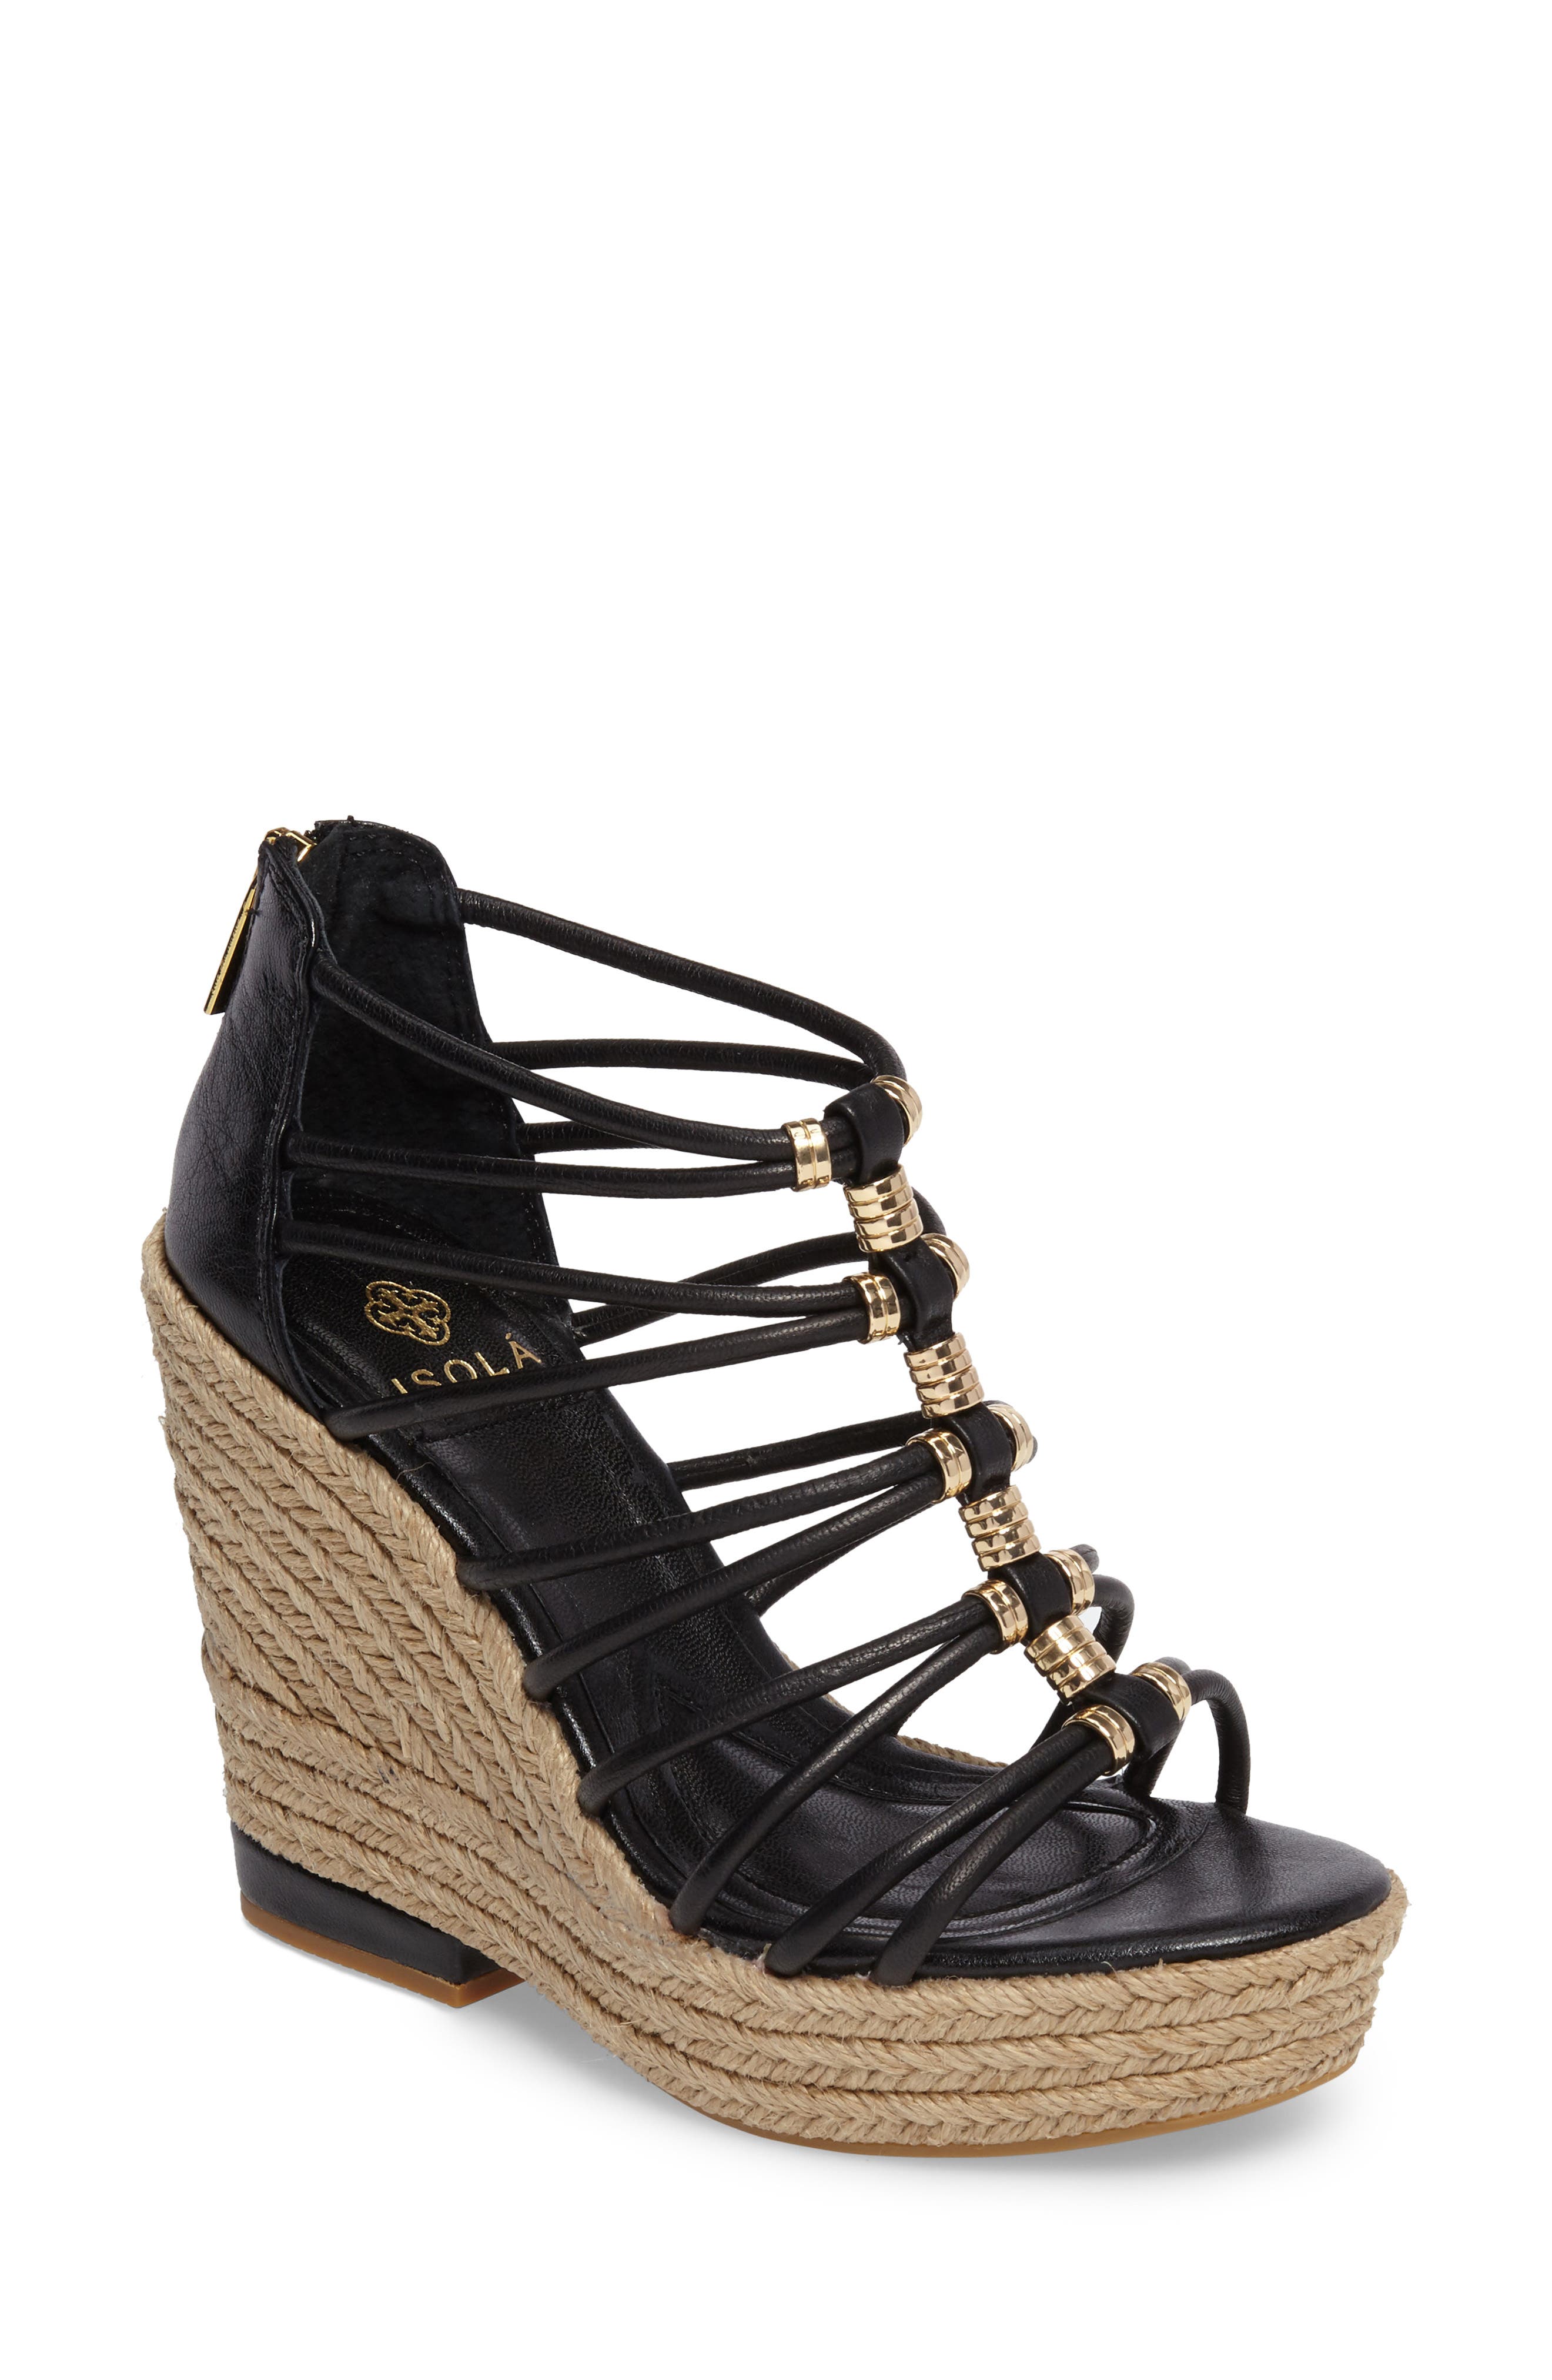 isola shoes nordstrom